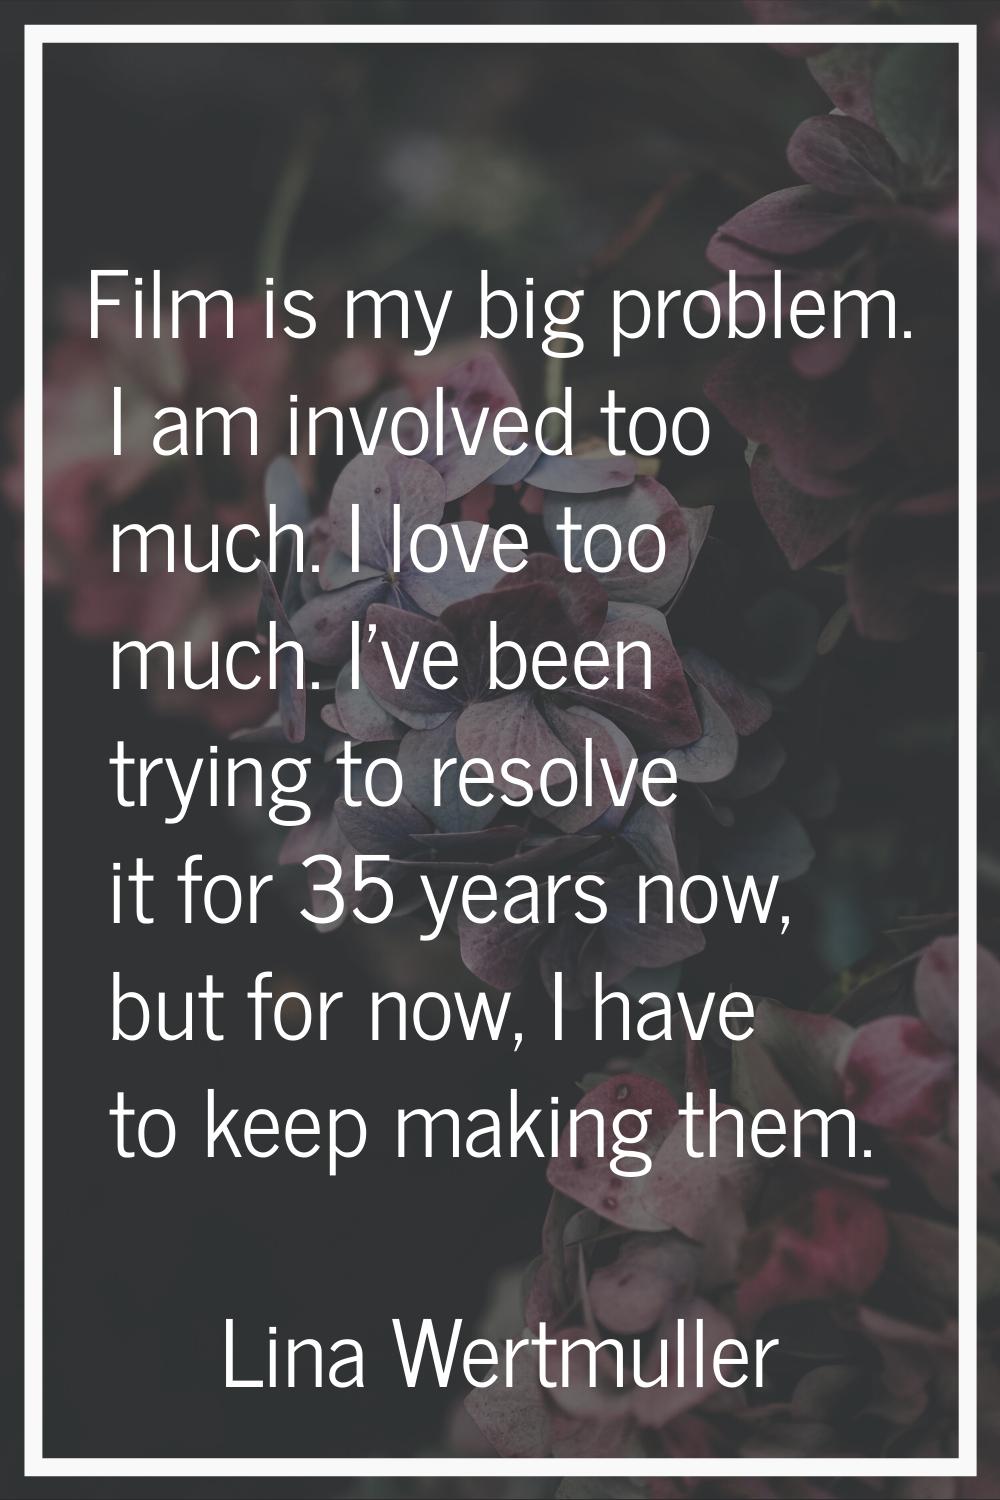 Film is my big problem. I am involved too much. I love too much. I've been trying to resolve it for